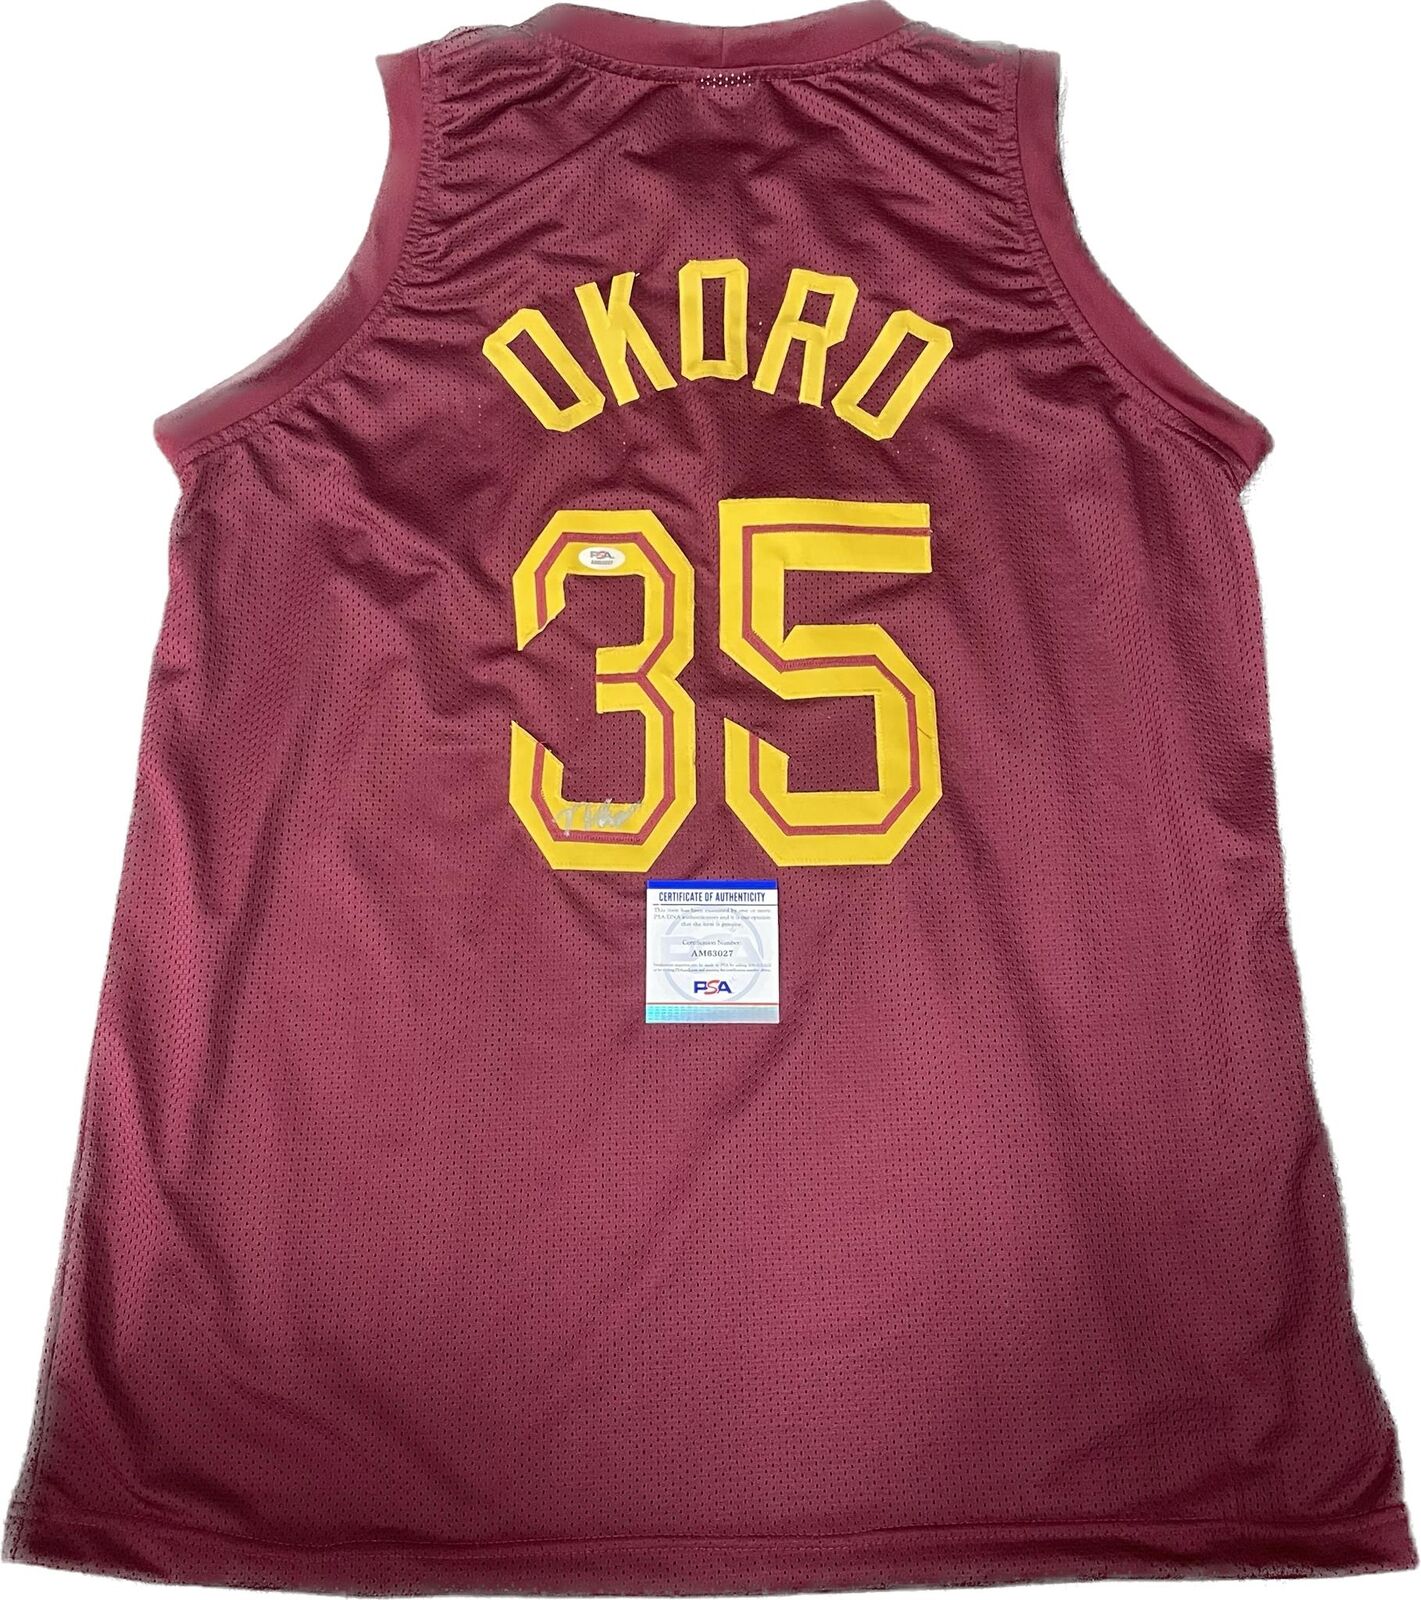 Donovan Mitchell Cleveland Cavaliers Autographed Nike Icon Swingman Jersey